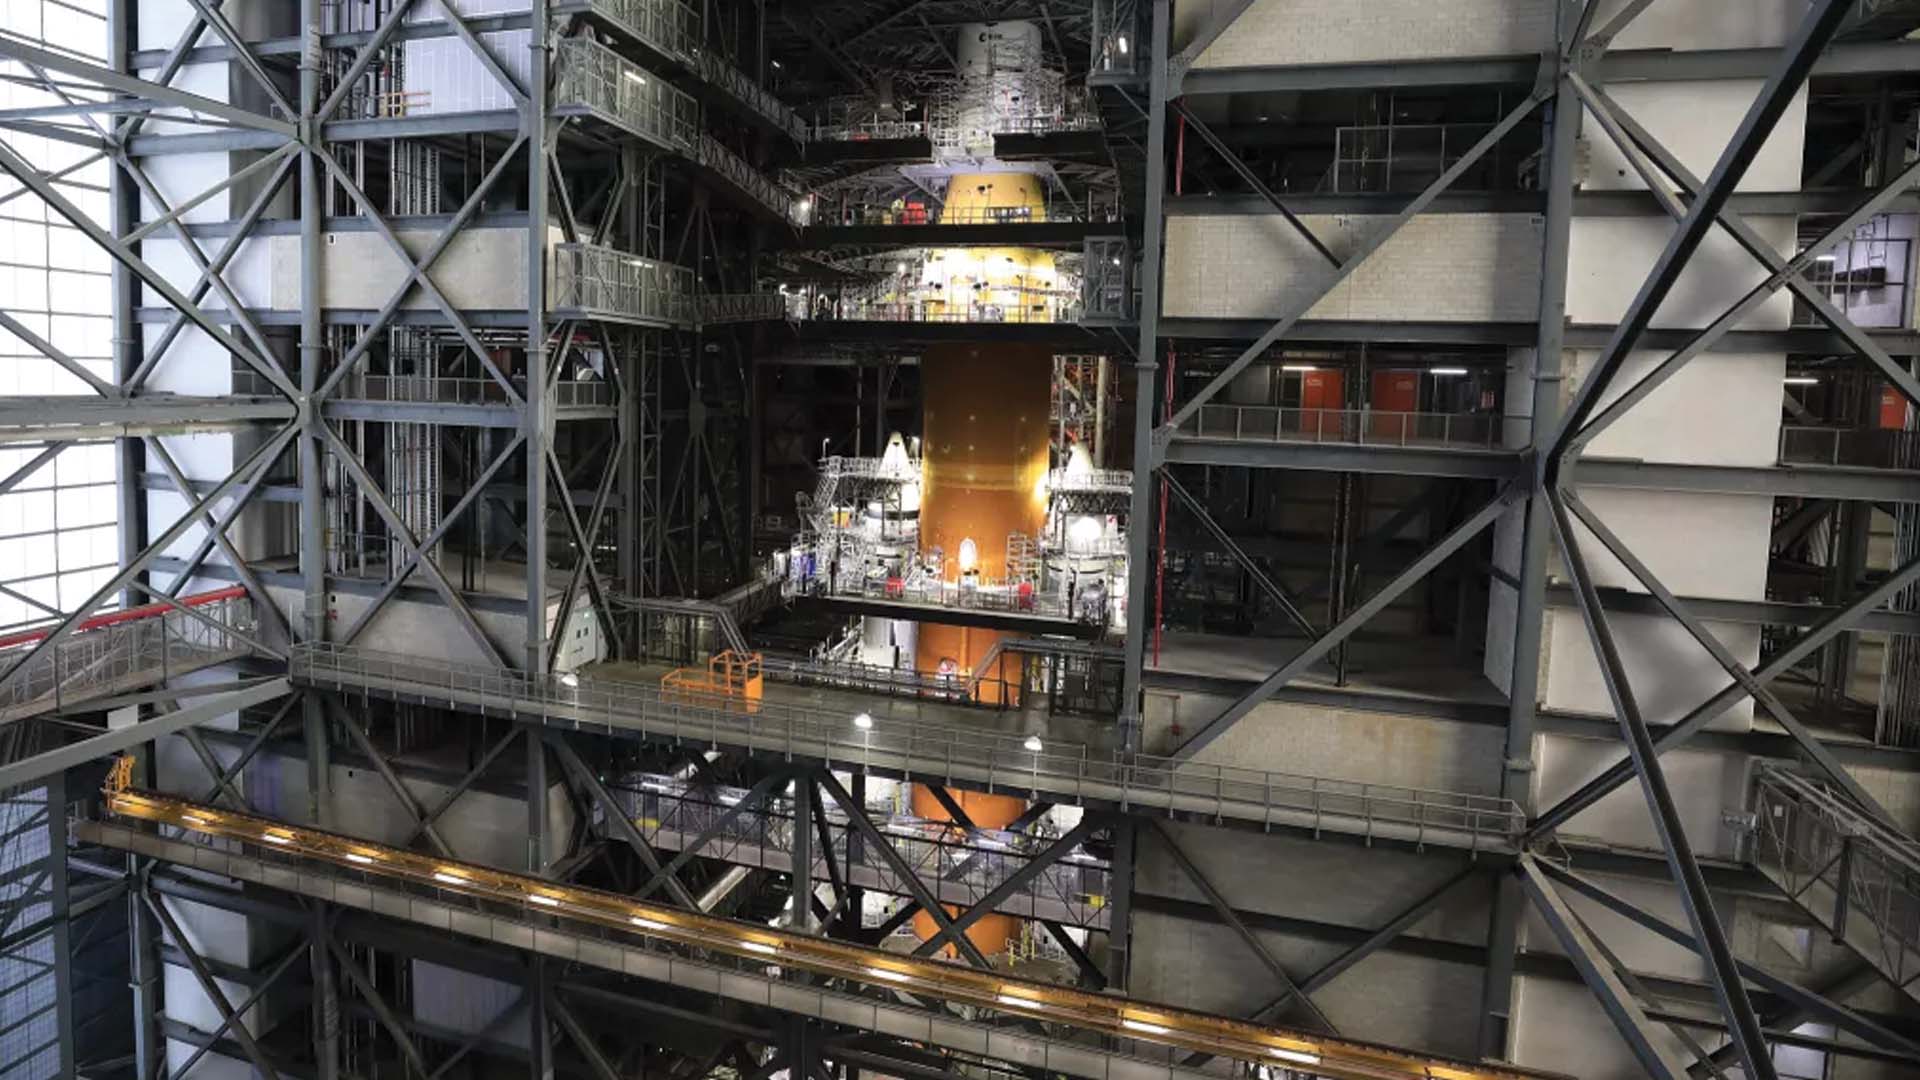 The SLS rocket and Orion spacecraft for NASA's Artemis 1 mission as seen inside the Vehicle Assembly Building at Kennedy Space Center in Florida on Dec. 13, 2021.